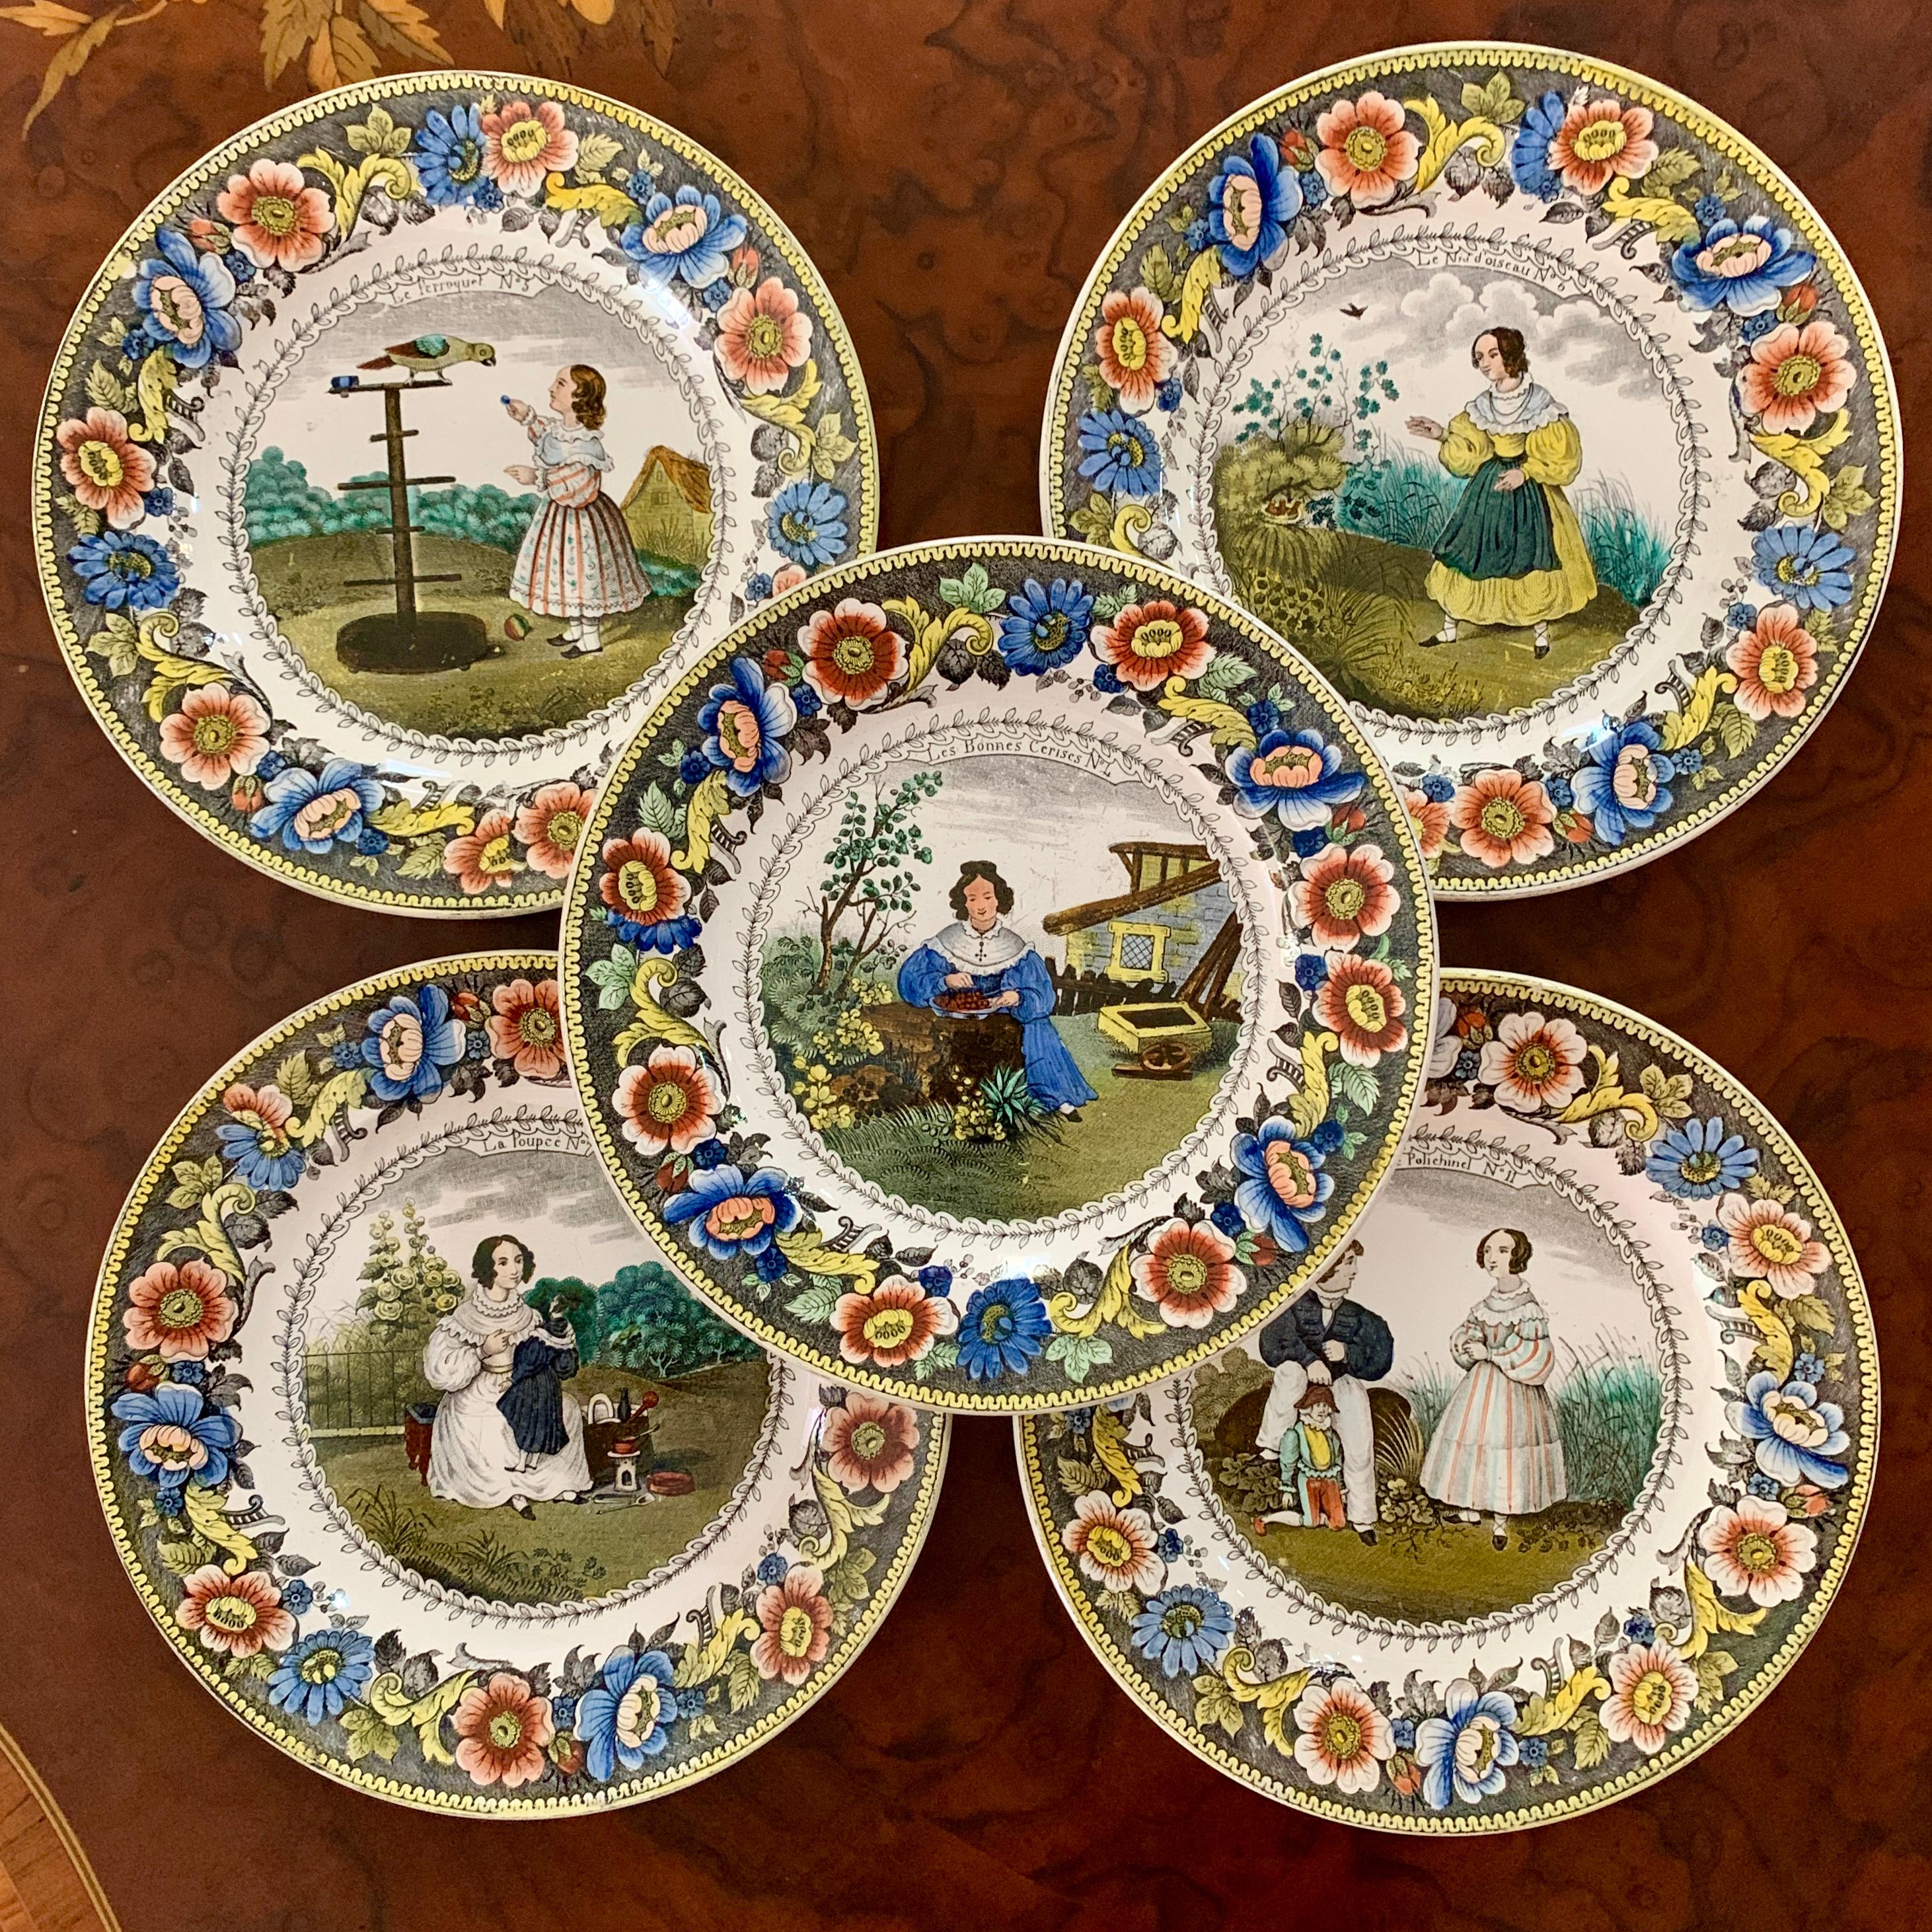 From the Creil region of Northern France, a transfer printed polychrome plate, titled -Les Bonnes Cerises (the good cherries) Circa 1830.

The image shows No. 4 from a series of twelve. A young lady in a bright blue period dress, sits in a garden